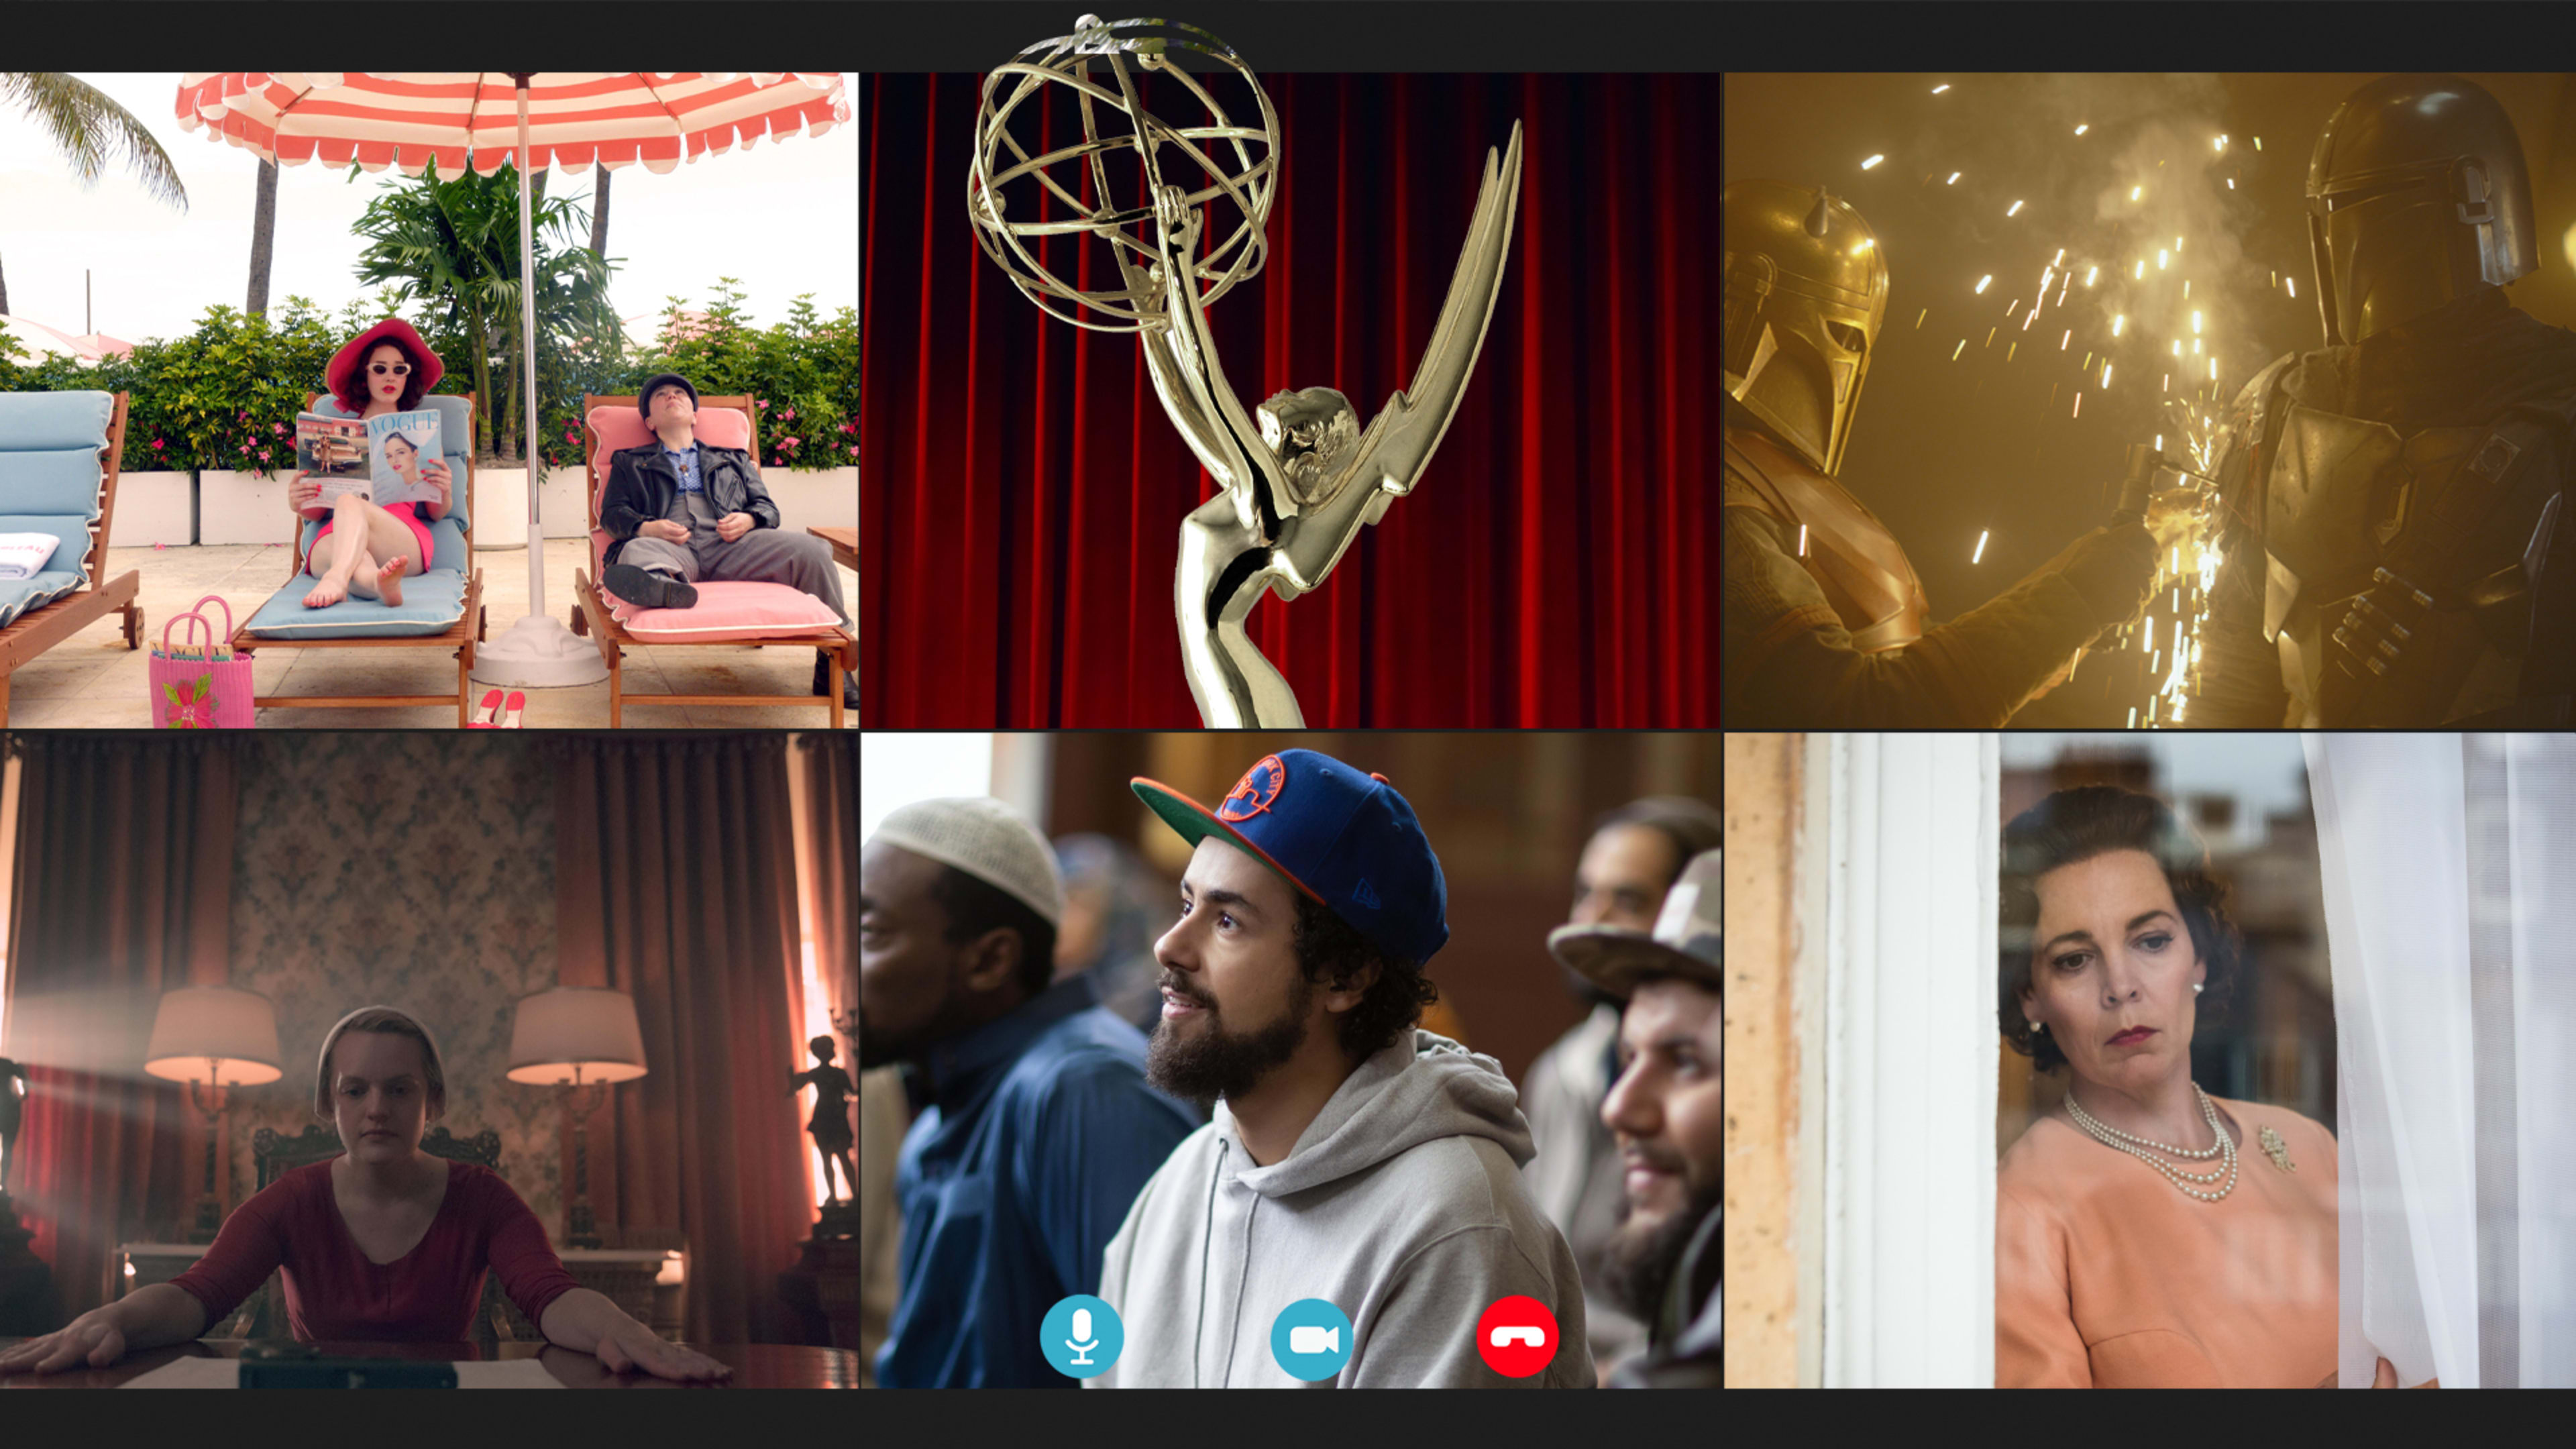 Mrs. Maisel bagels, Quibi’s quest, and Zoom, Zoom, Zoom: Emmy campaigns in the age of COVID-19